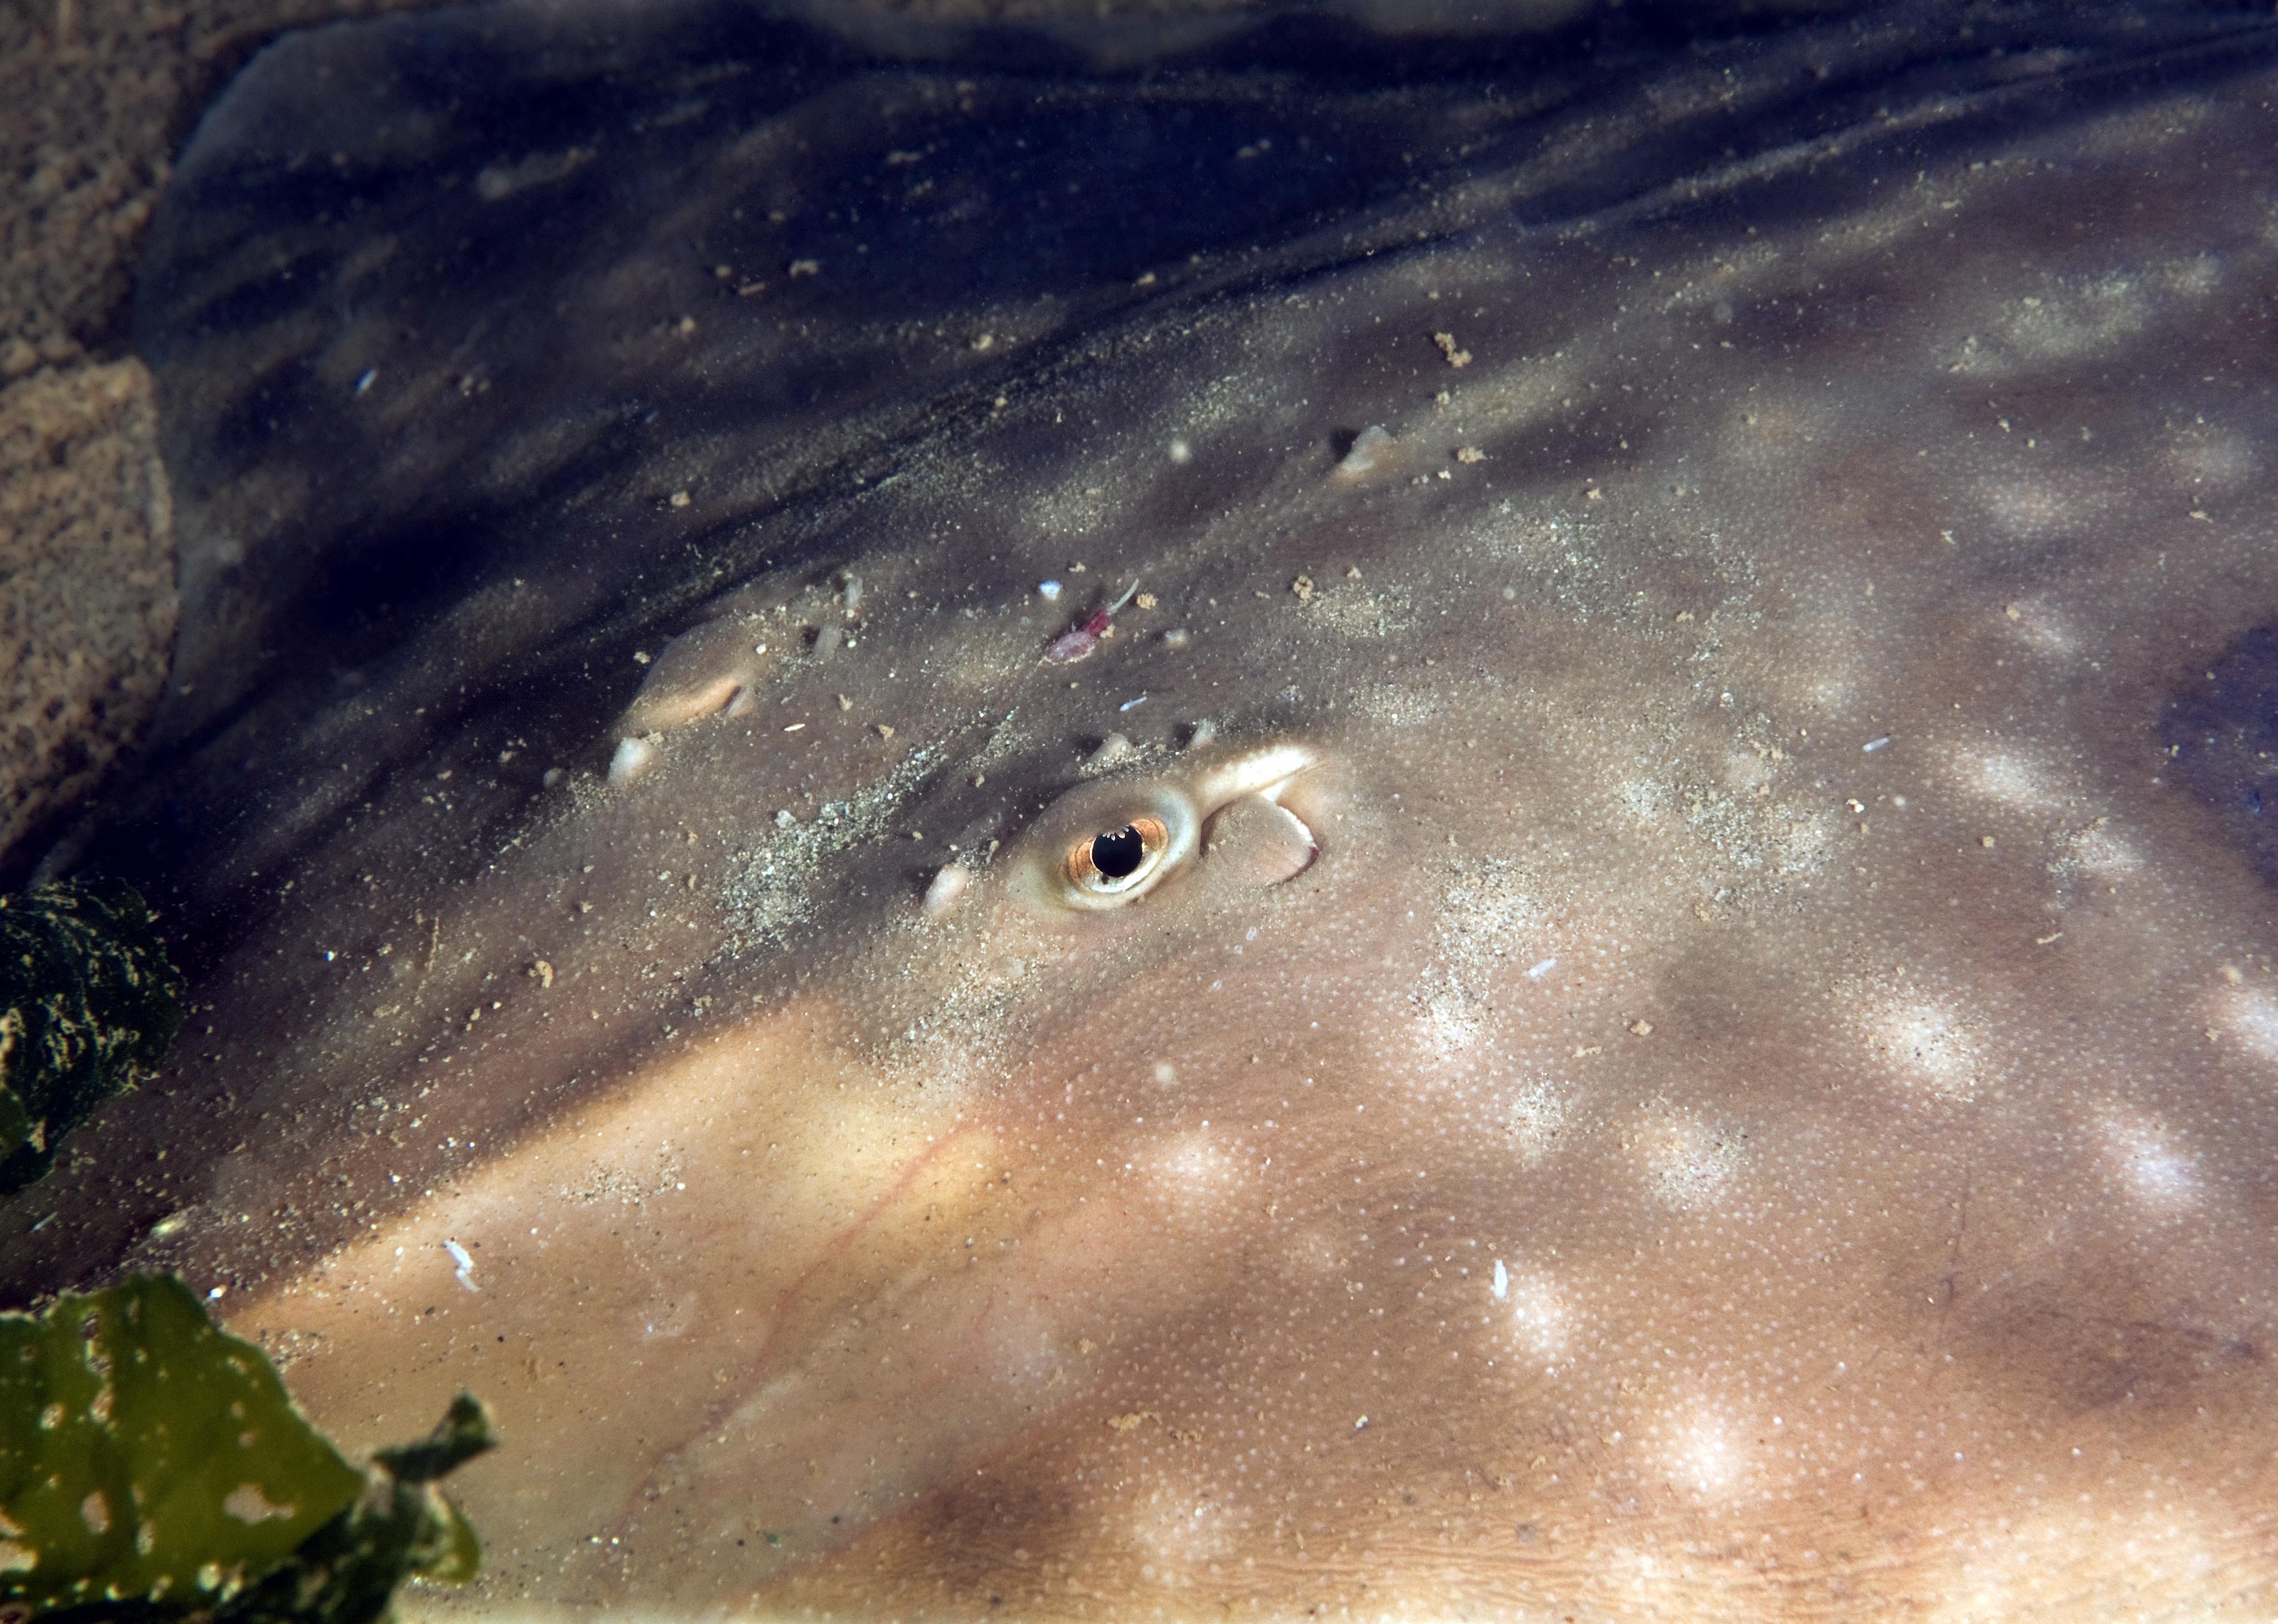 A big skate laying on the ocean floor.